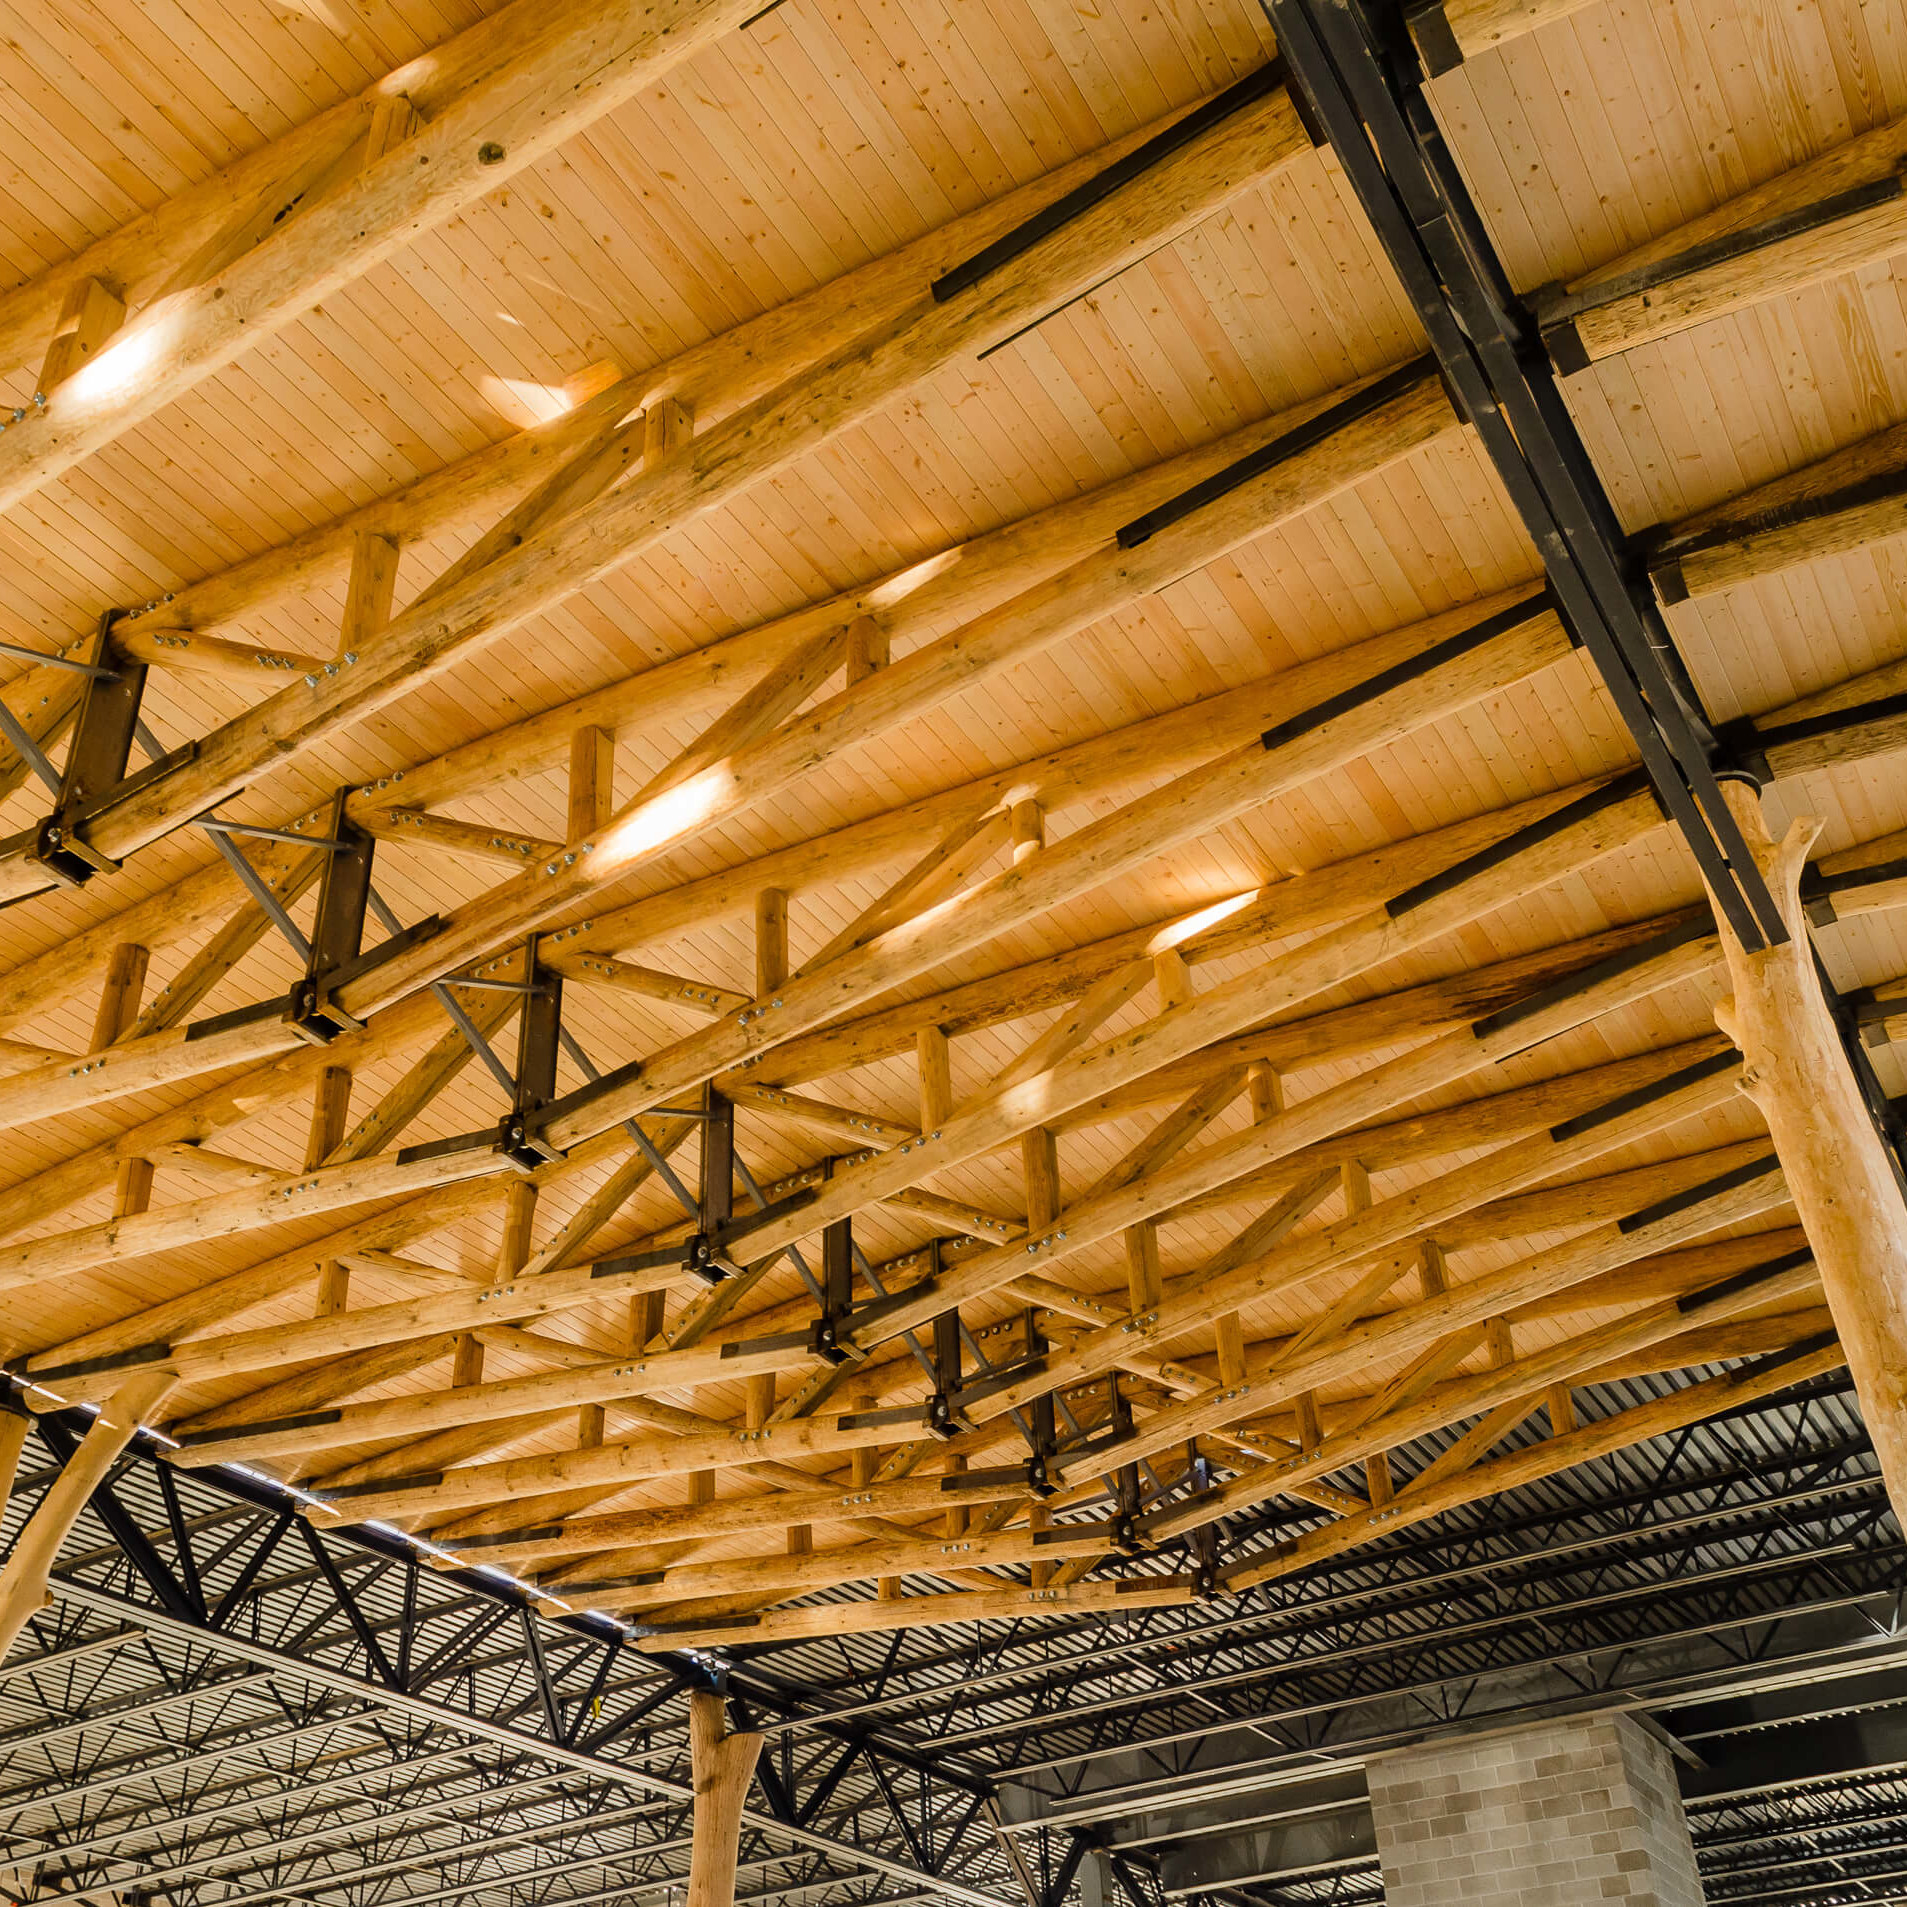 an exposed wooden truss system within a building's interior